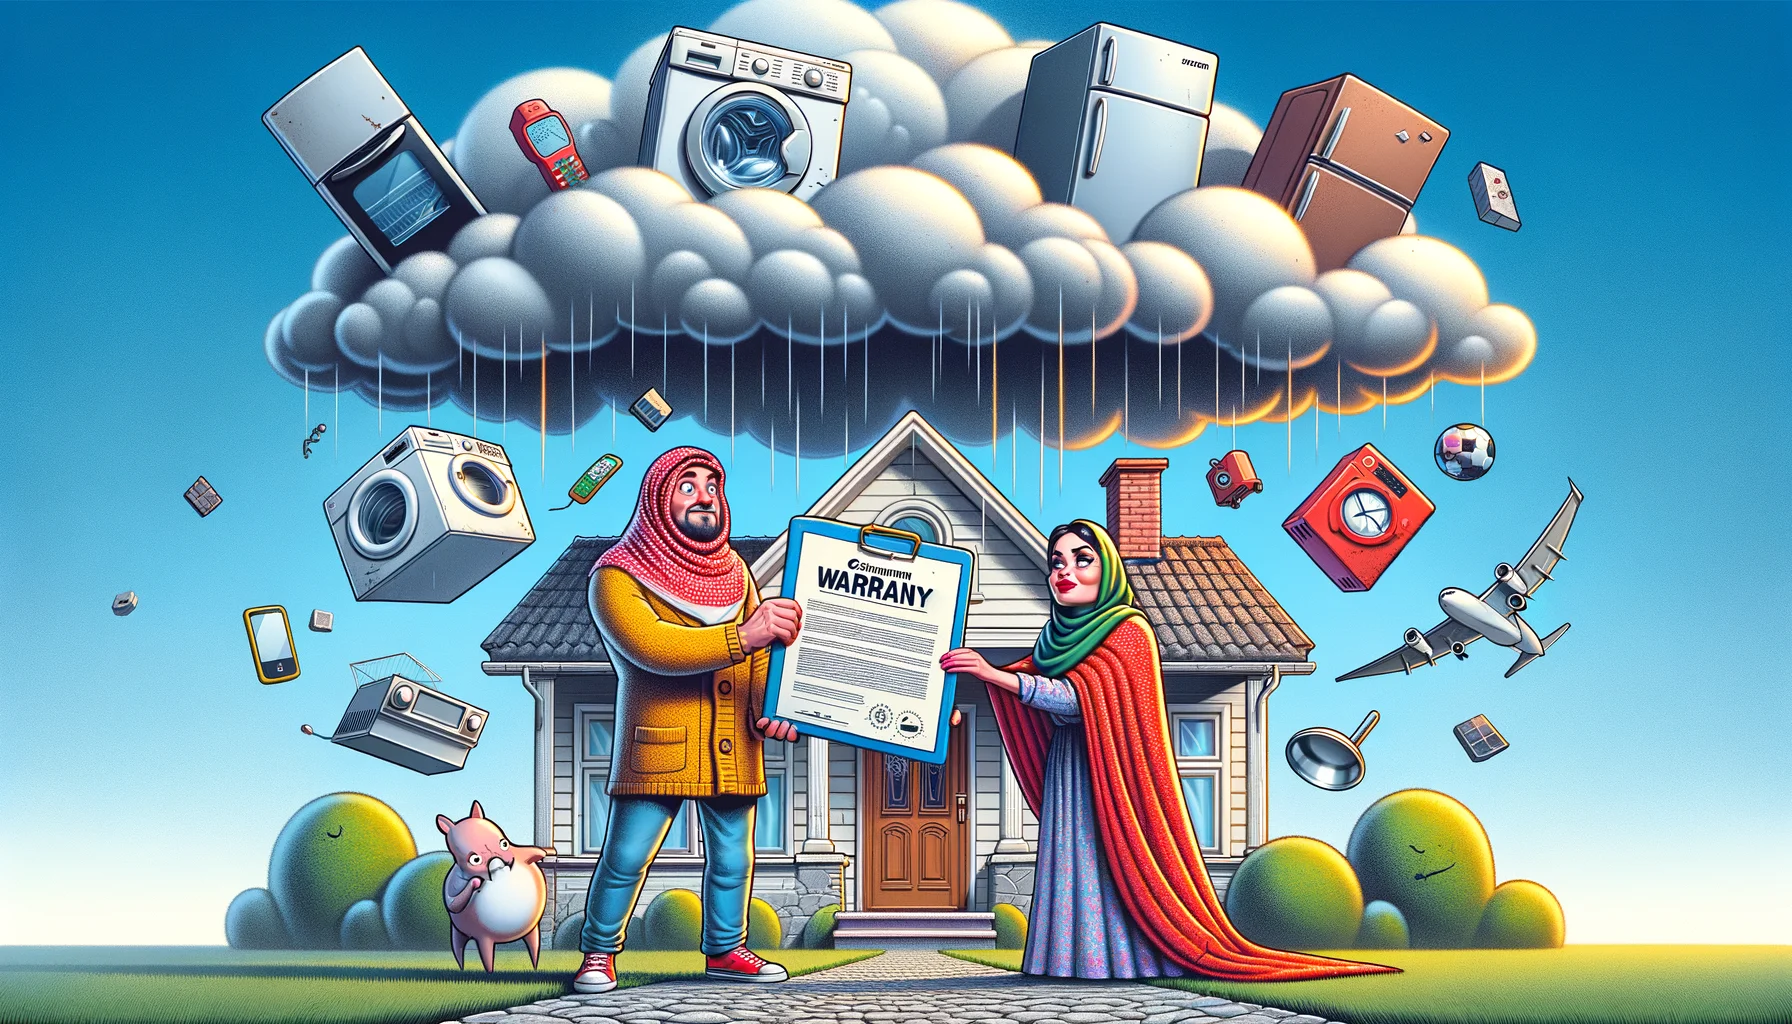 Create an image that humorously depicts the concept of home warranties. It's a traditional family home, with clouds shaped like broken appliances like a washing machine, refrigerator and air conditioner hovering above it. A couple consisting of a Caucasian man and Middle-Eastern woman, comically animated, hold out an oversized, brightly-colored warranty document as a shield to protect the house from the raining appliance parts. The scene should evoke humor with a cartoon-style exaggeration of emotions and situations, while also maintaining an element of truth about the unexpected and unpredictable nature of home repairs.